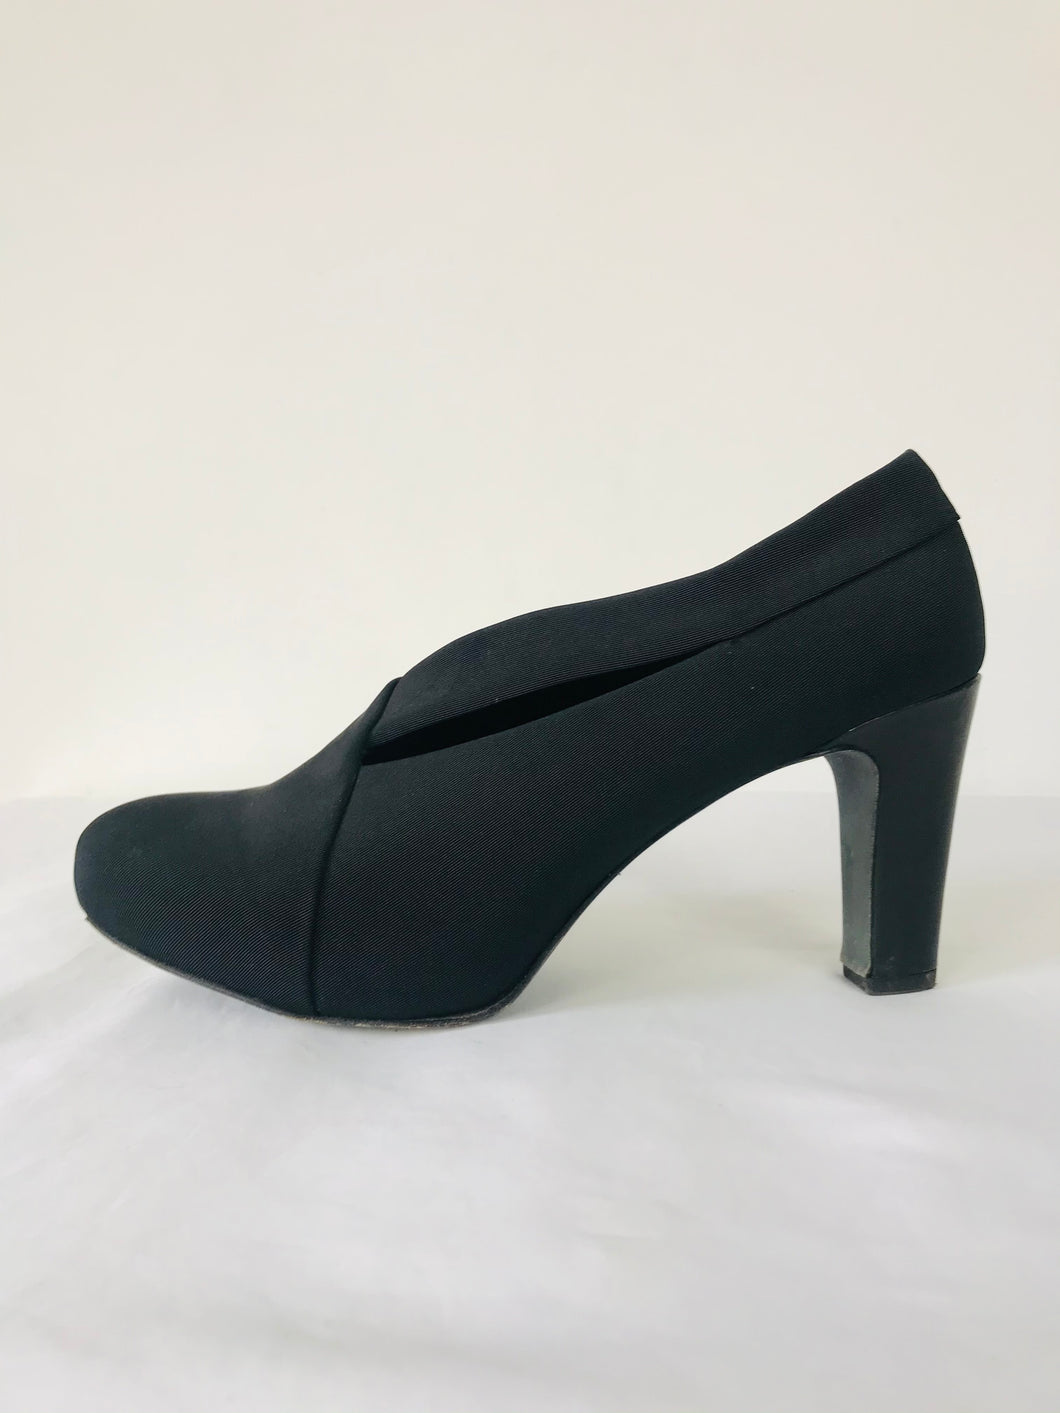 Eileen Fisher Women’s Rounded Cut-Out Court Heels | UK 6.5 | Black